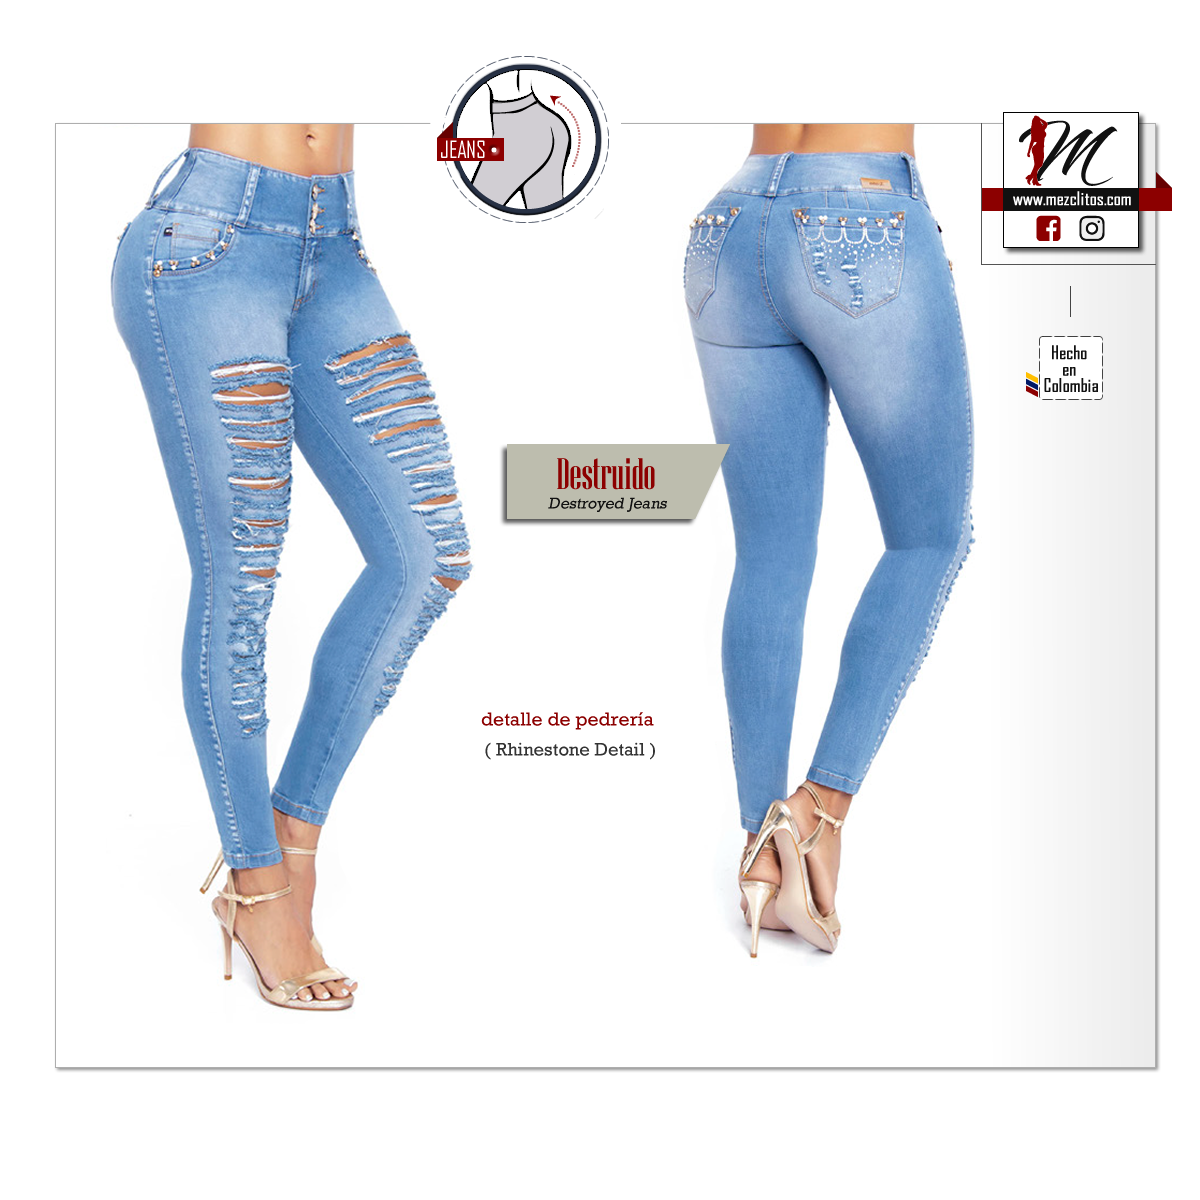 Ene2 Jeans 901689 - 100% Colombianos